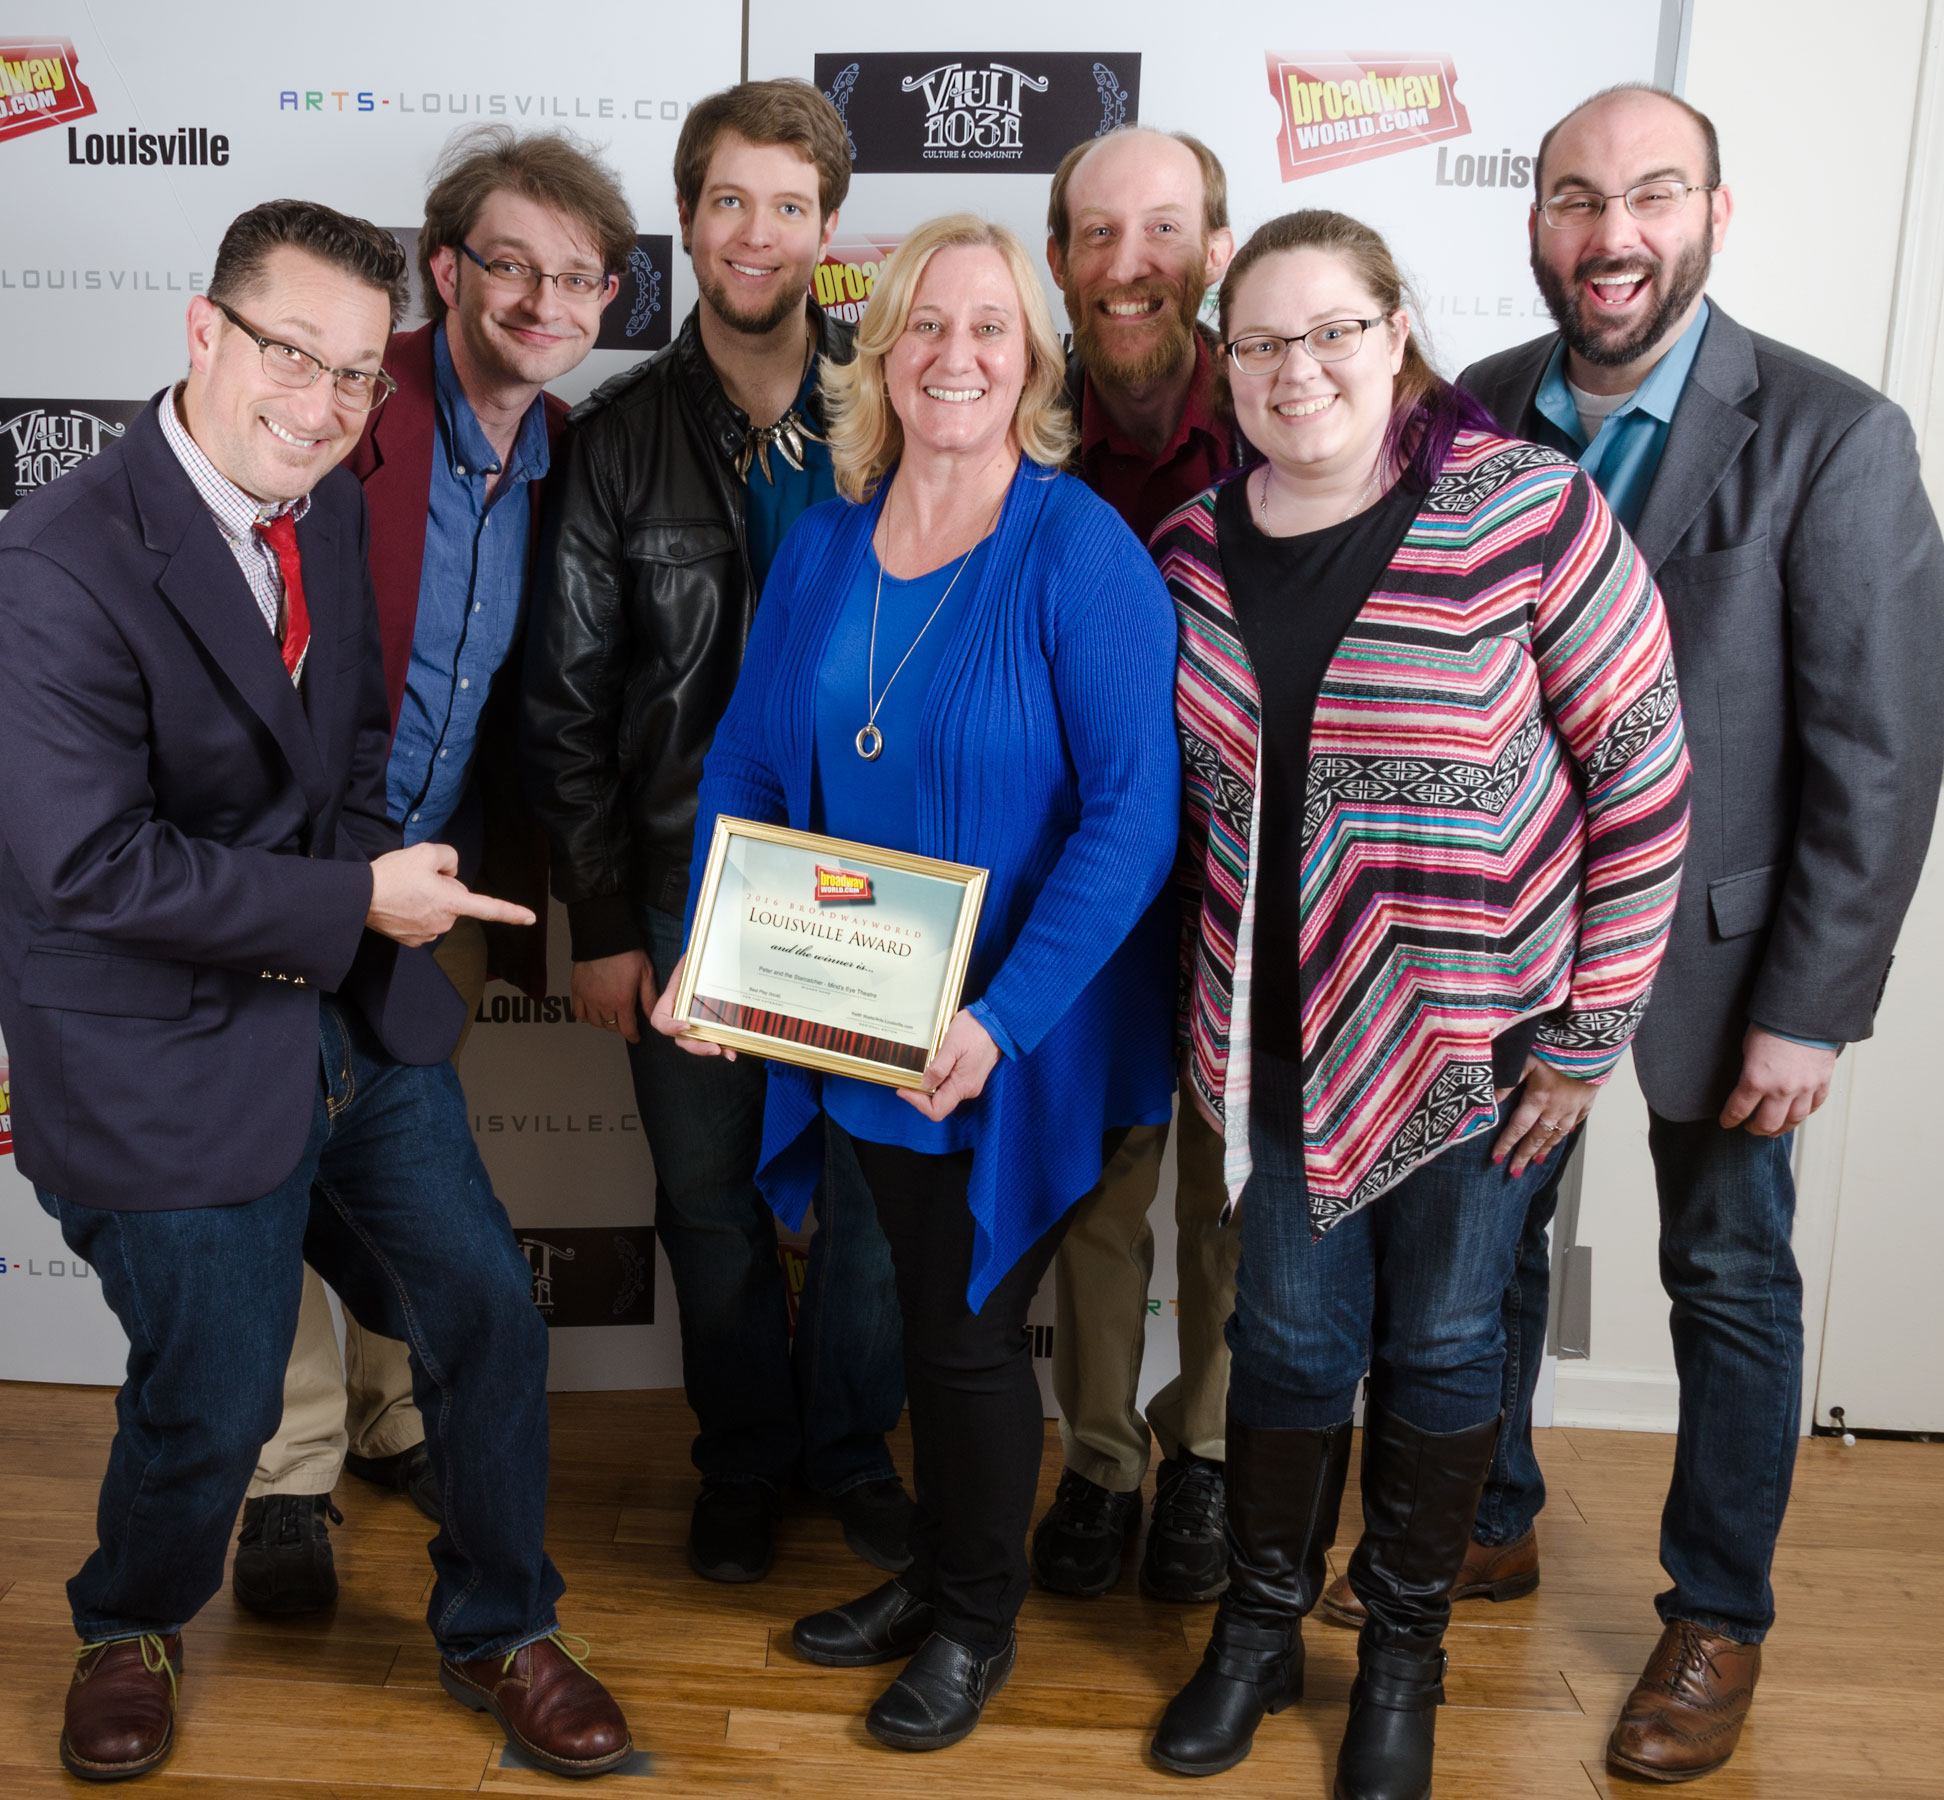 3rd Annual Arts-Louisville/Broadway World Awards Ceremony